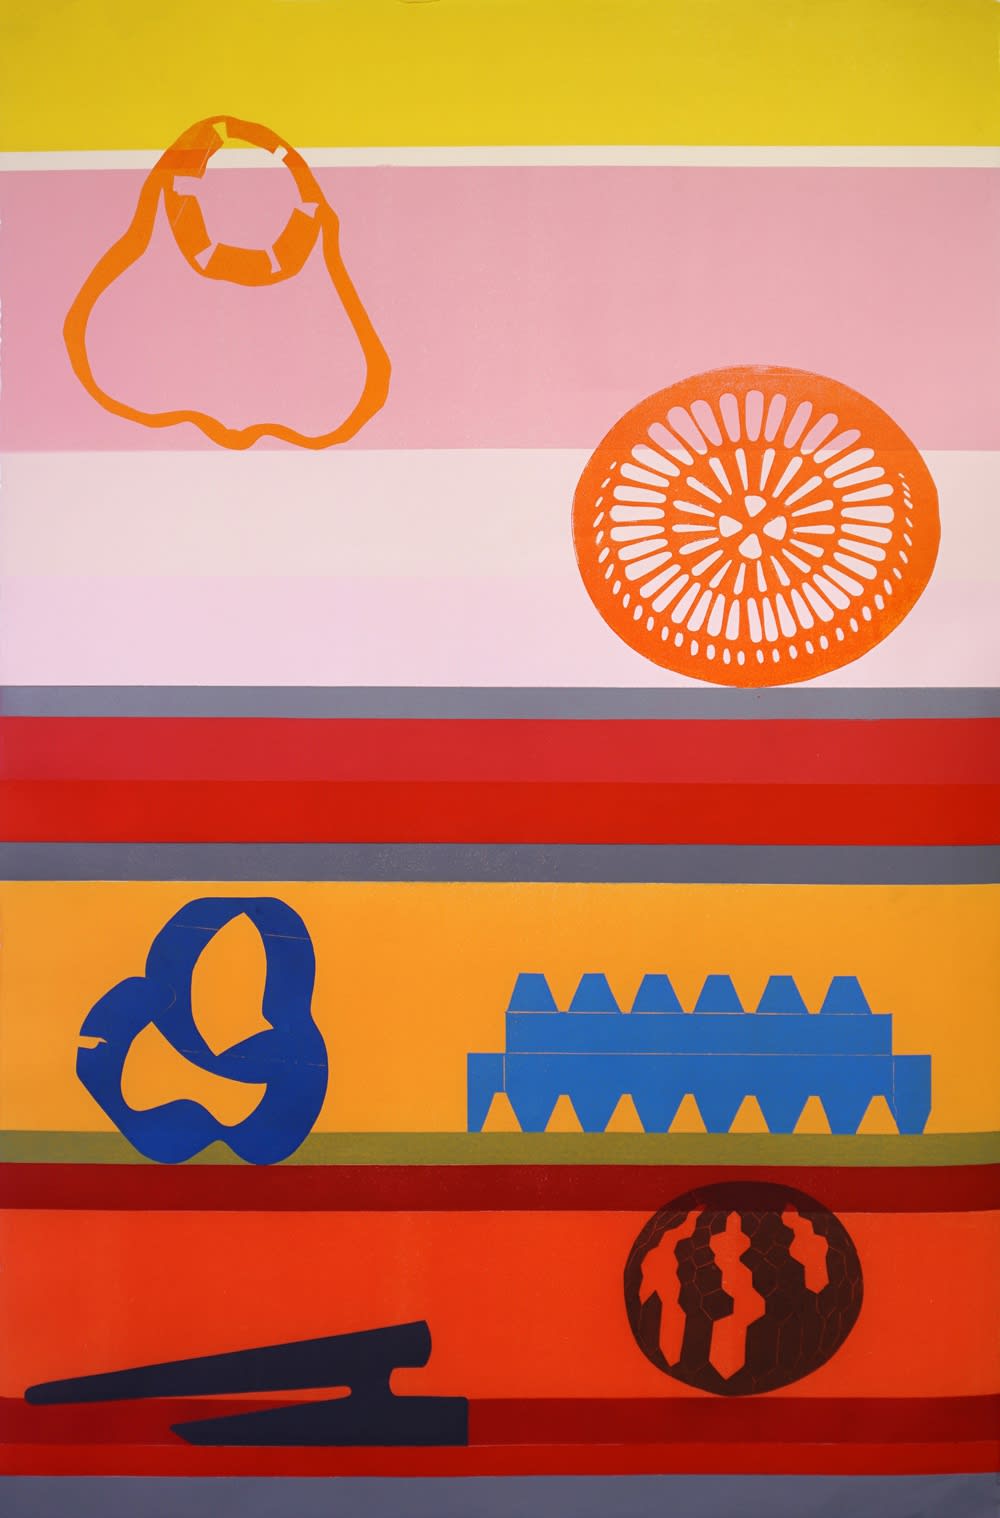 Claire Willberg Shelf Series 2 relief print. Silhouettes of discarded items found by the artist in blue, black, yellow and grey accompany an orange and pink striped shelf background.